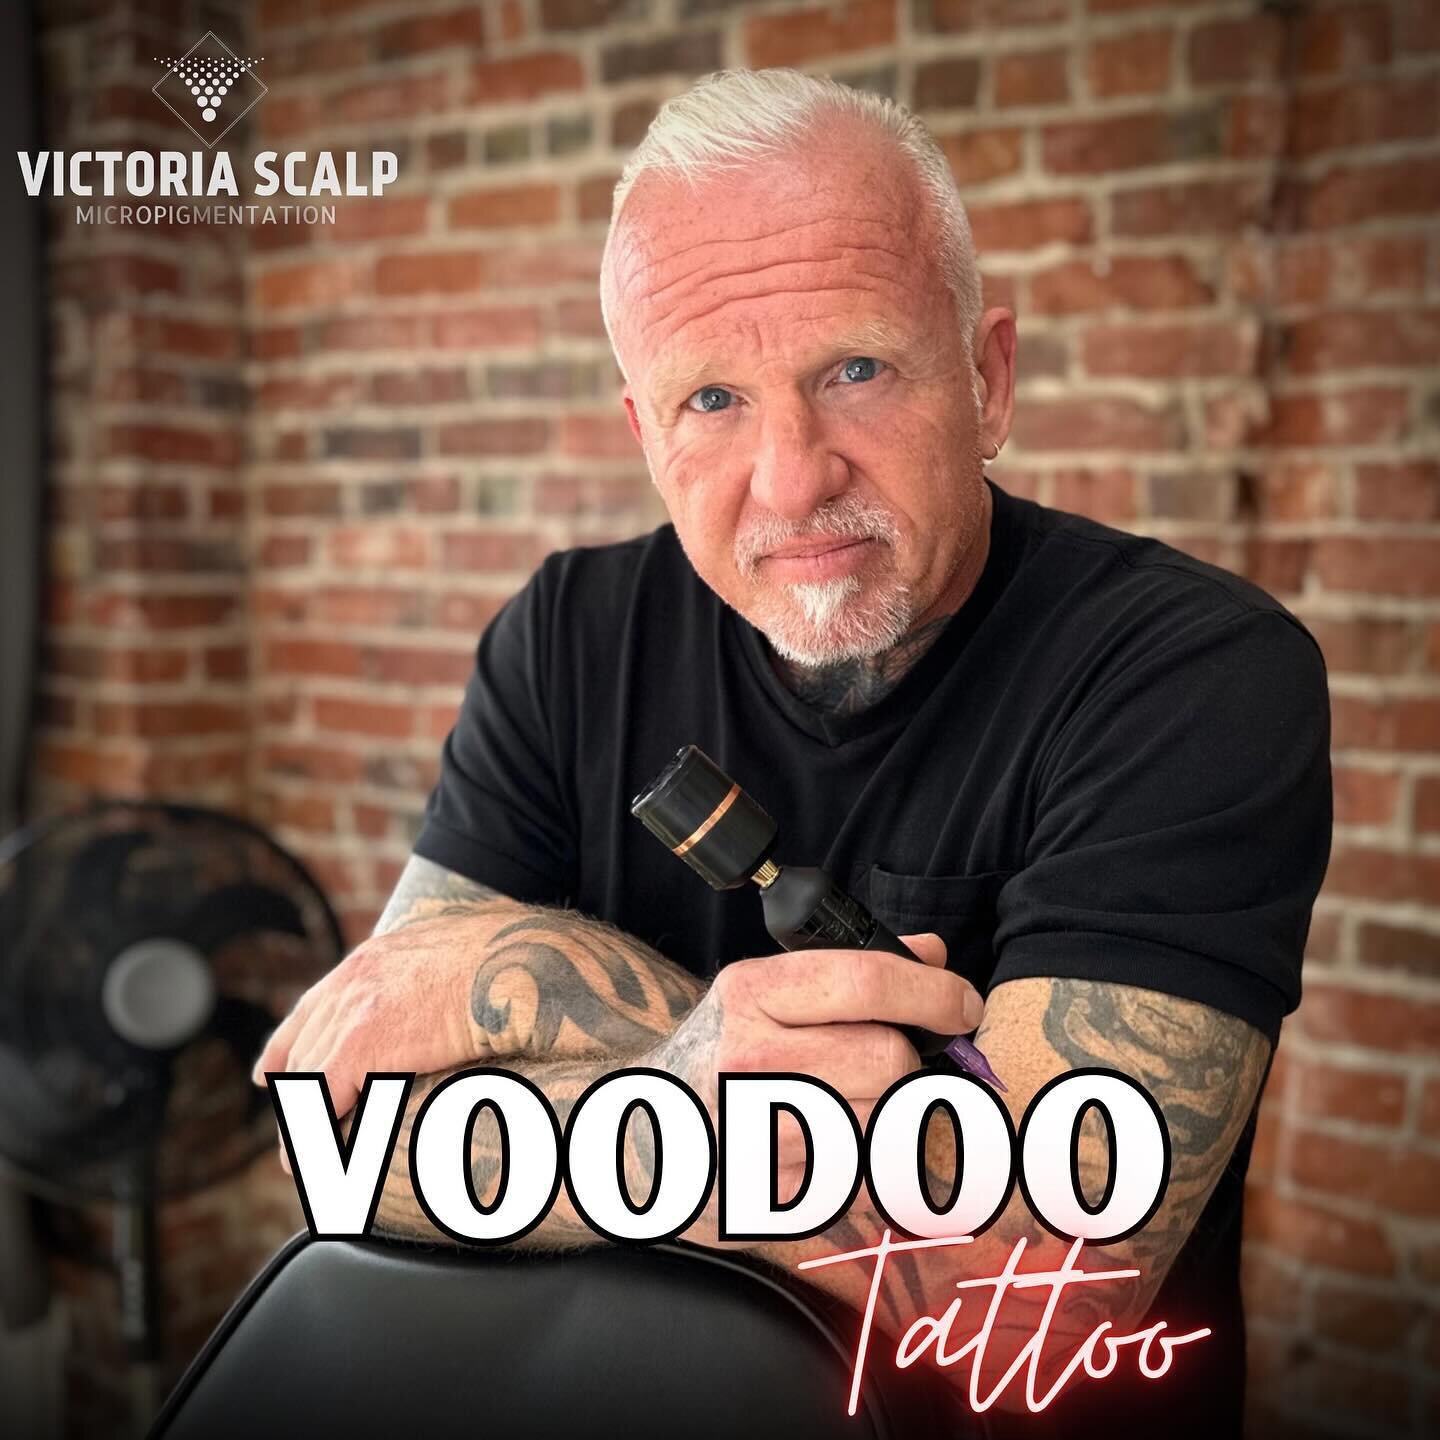 &bull;VOODOO TATTOO&bull; 
👉🏼👉🏼👉🏼 SWIPE to see Art 
Now accepting new clients @ Victoria Scalp 🙌🏼

It is with great pleasure I welcome my old friend and tattoo hero Voodoo to the studio. He is a very well known and respected tattoo artist who